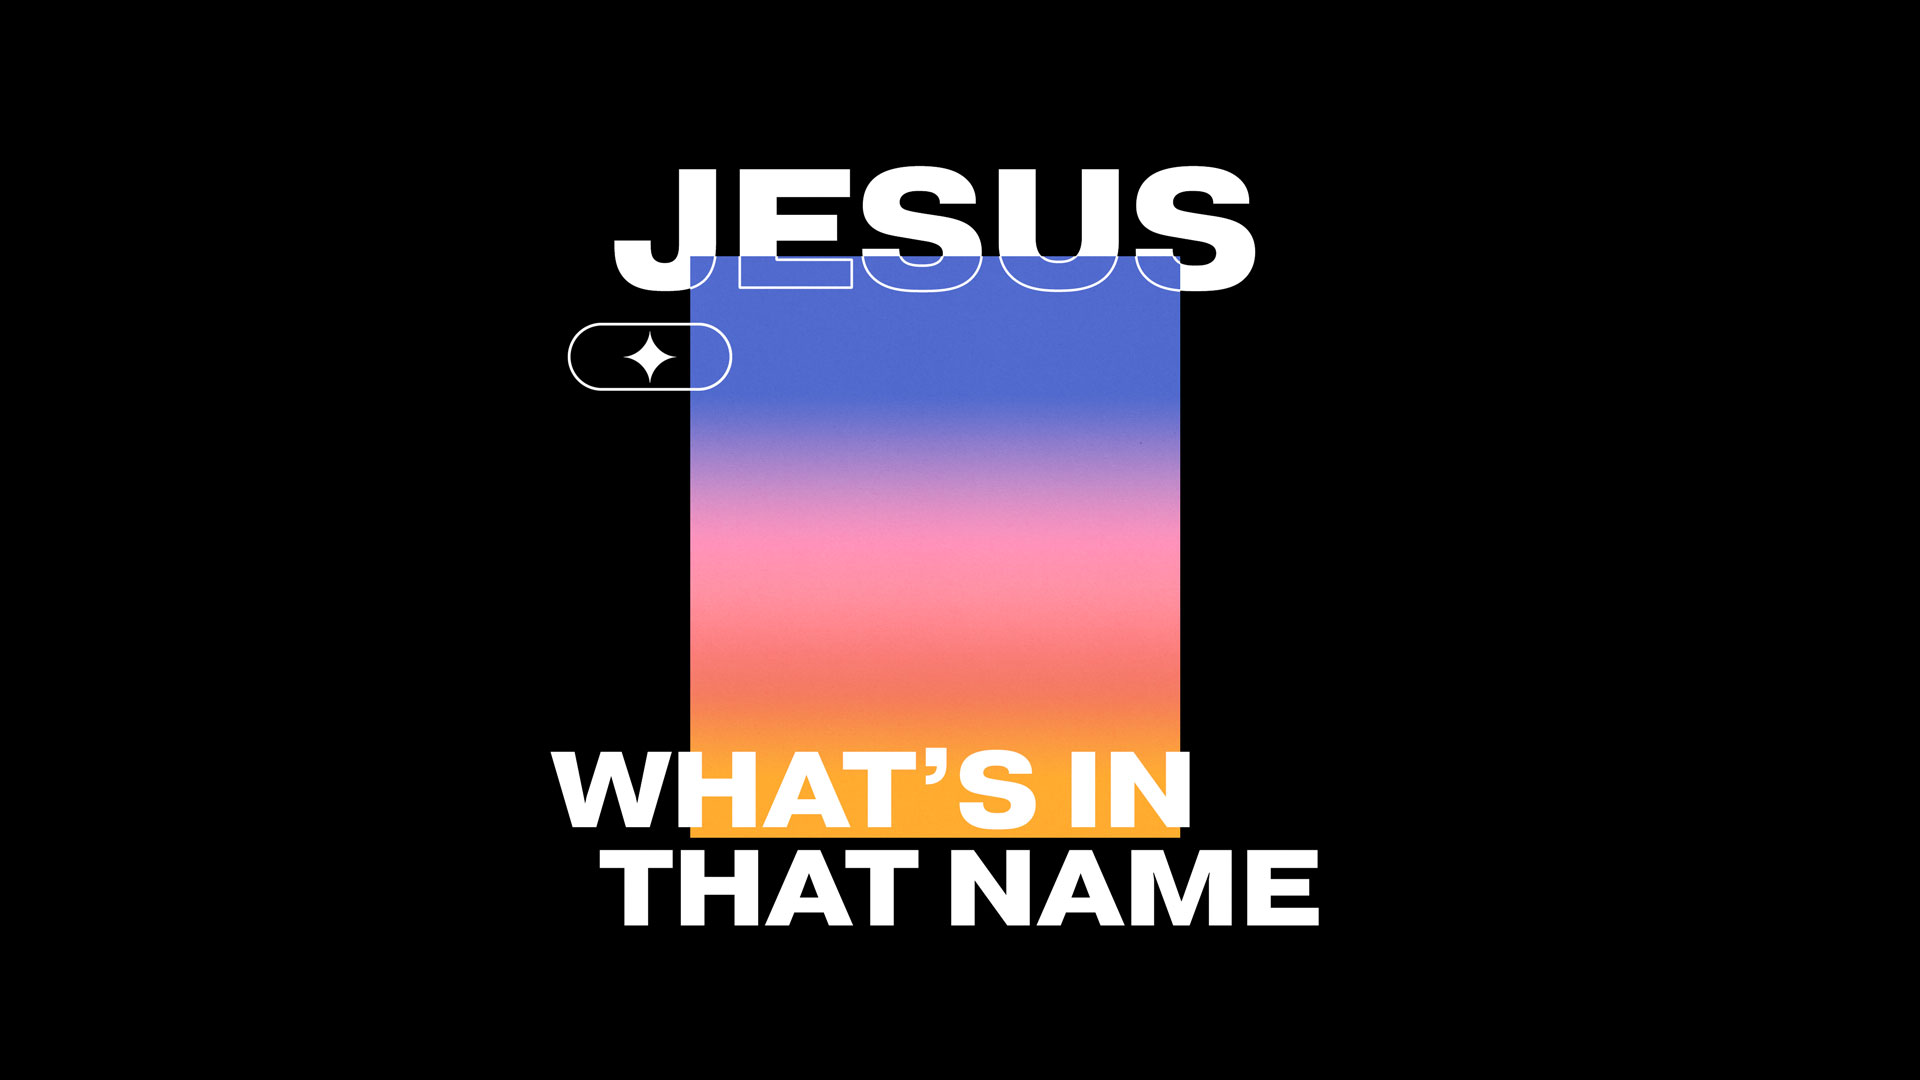 Jesus-What's in that Name?